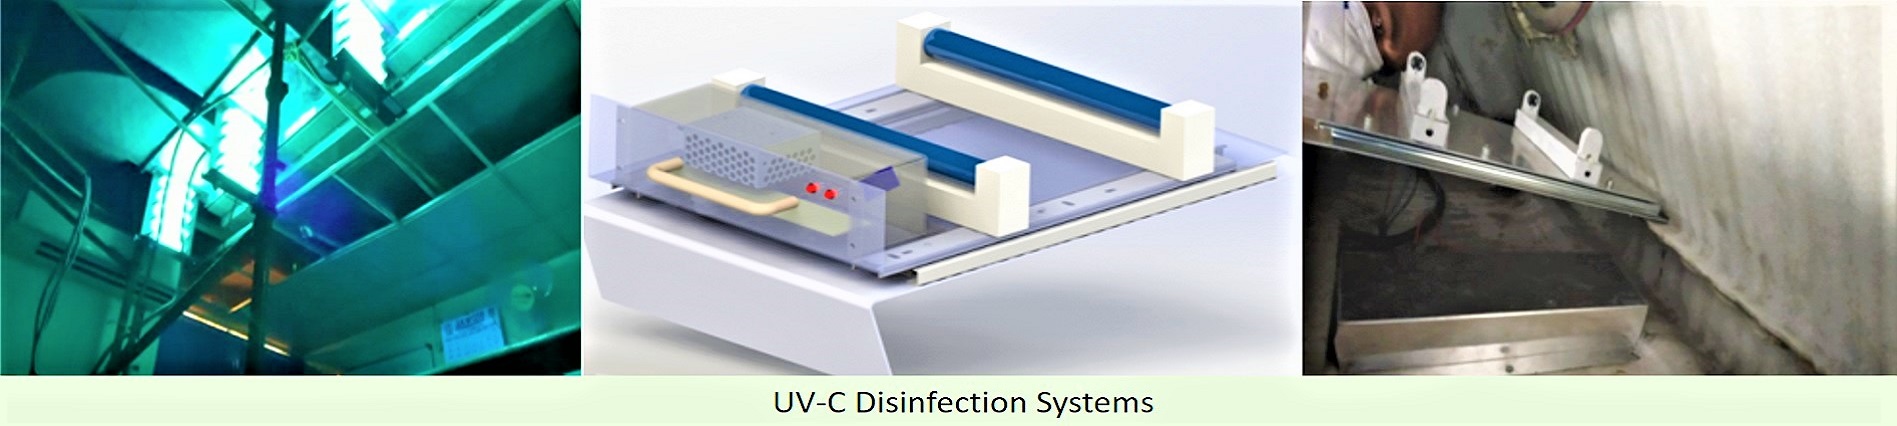 UV-C Disinfection Systems
